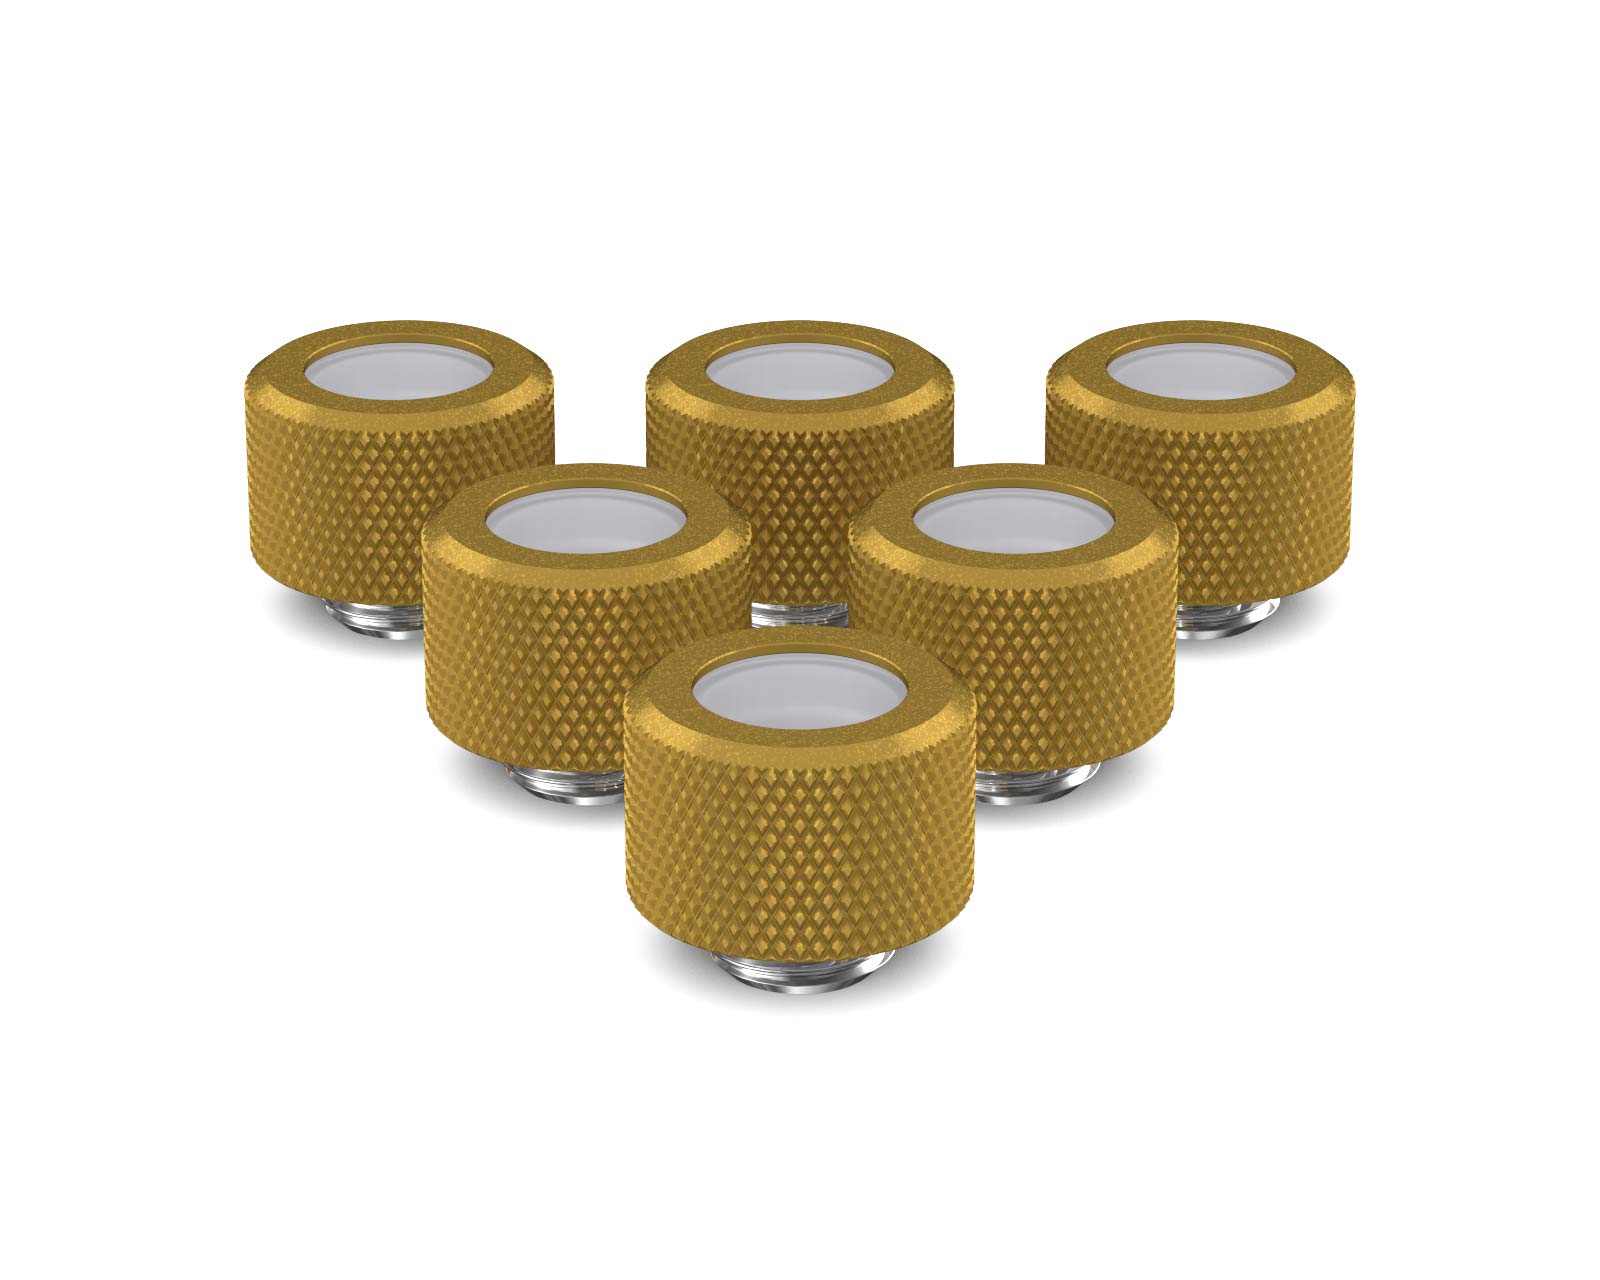 PrimoChill 14mm OD Rigid SX Fitting - 6 Pack - PrimoChill - KEEPING IT COOL Gold